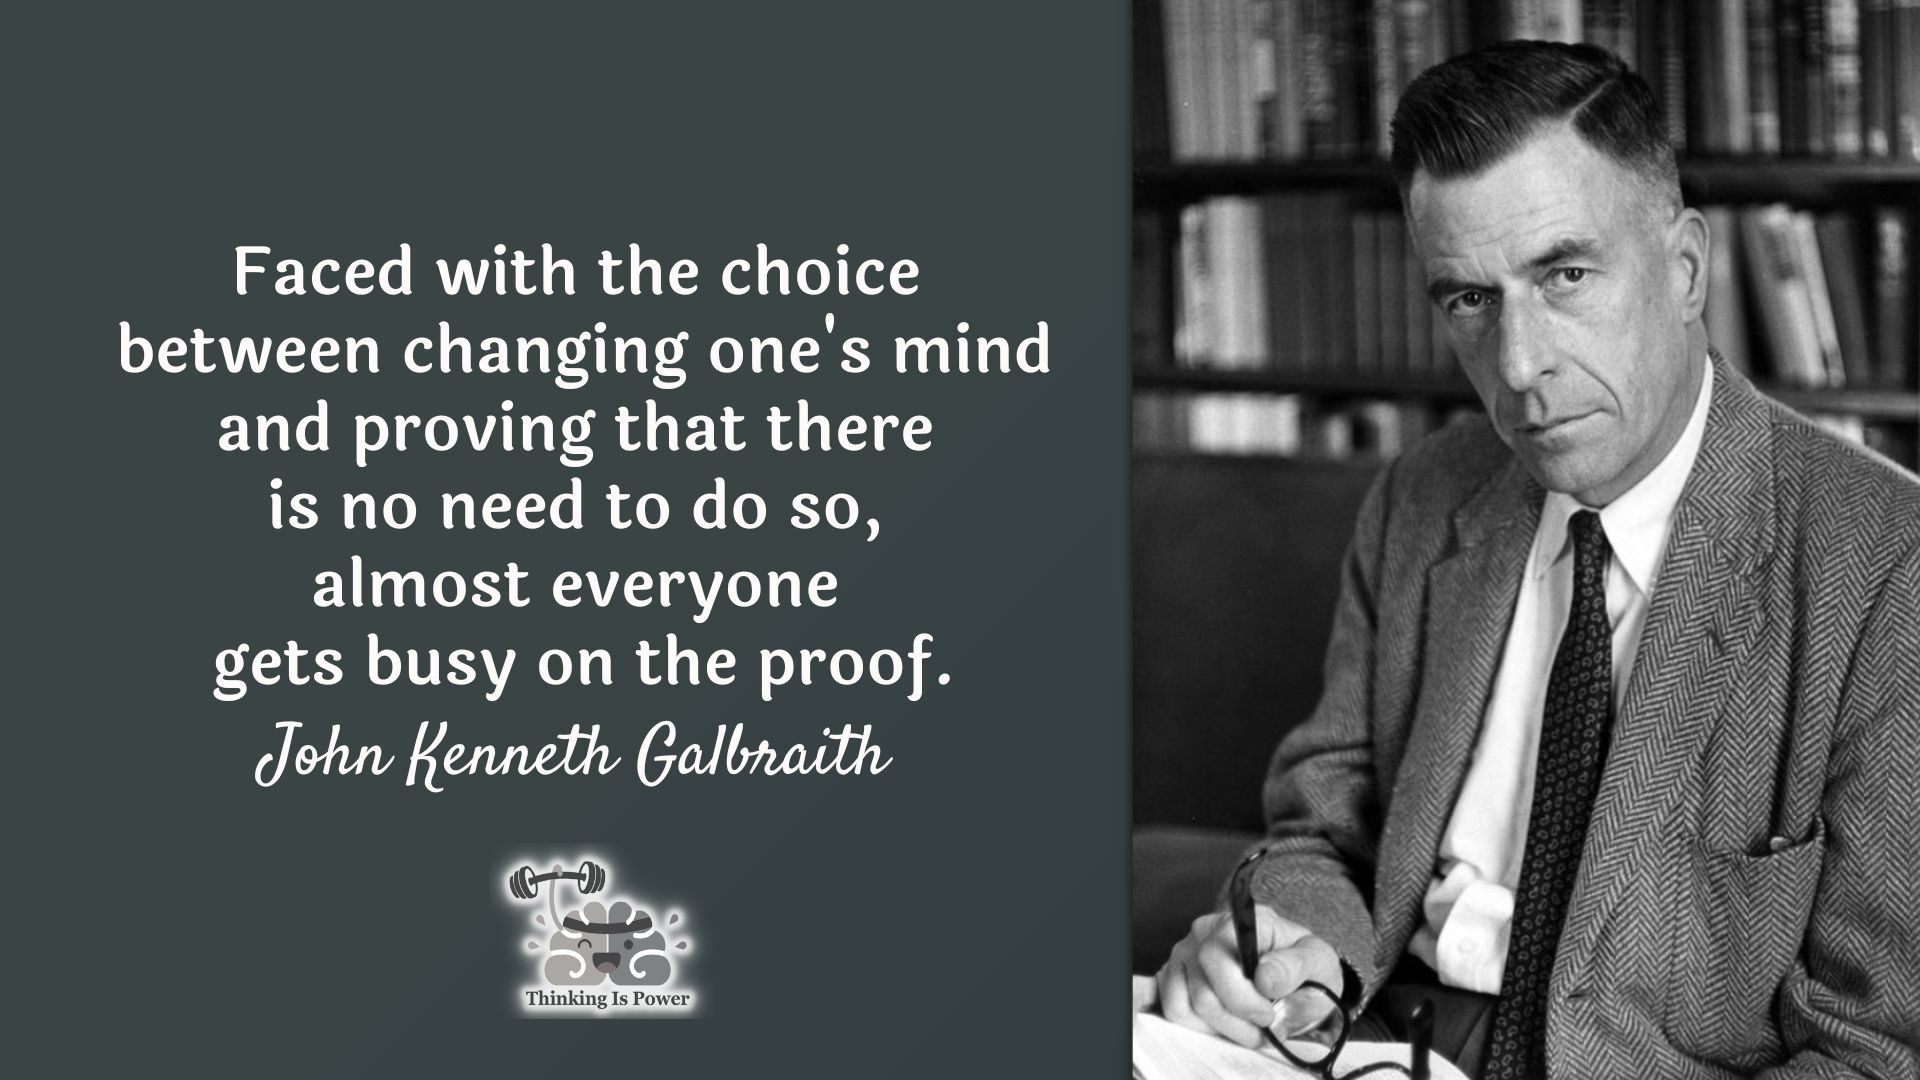 Quote JK Galbraith Faced with the choice between changing one's mind and proving that there is no need to do so, almost everyone gets busy on the proof.